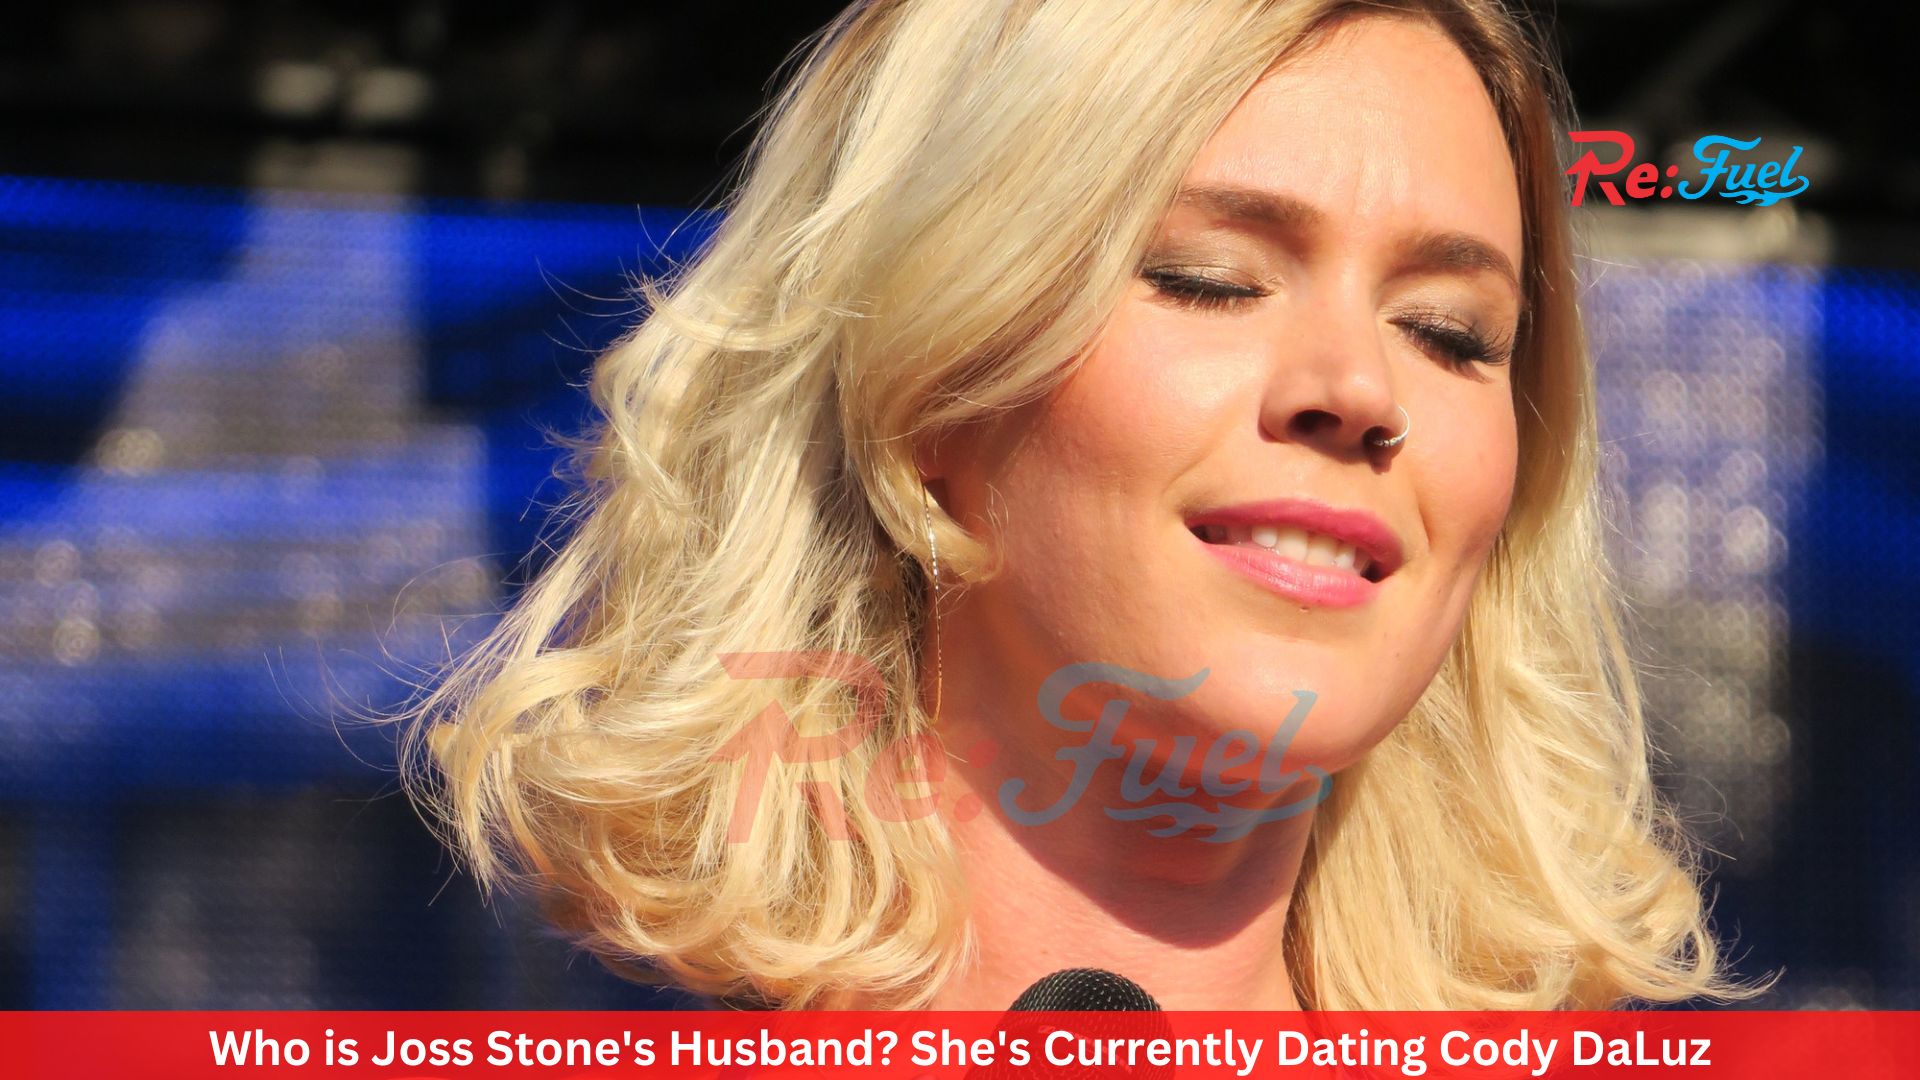 Who is Joss Stone's Husband? She's Currently Dating Cody DaLuz